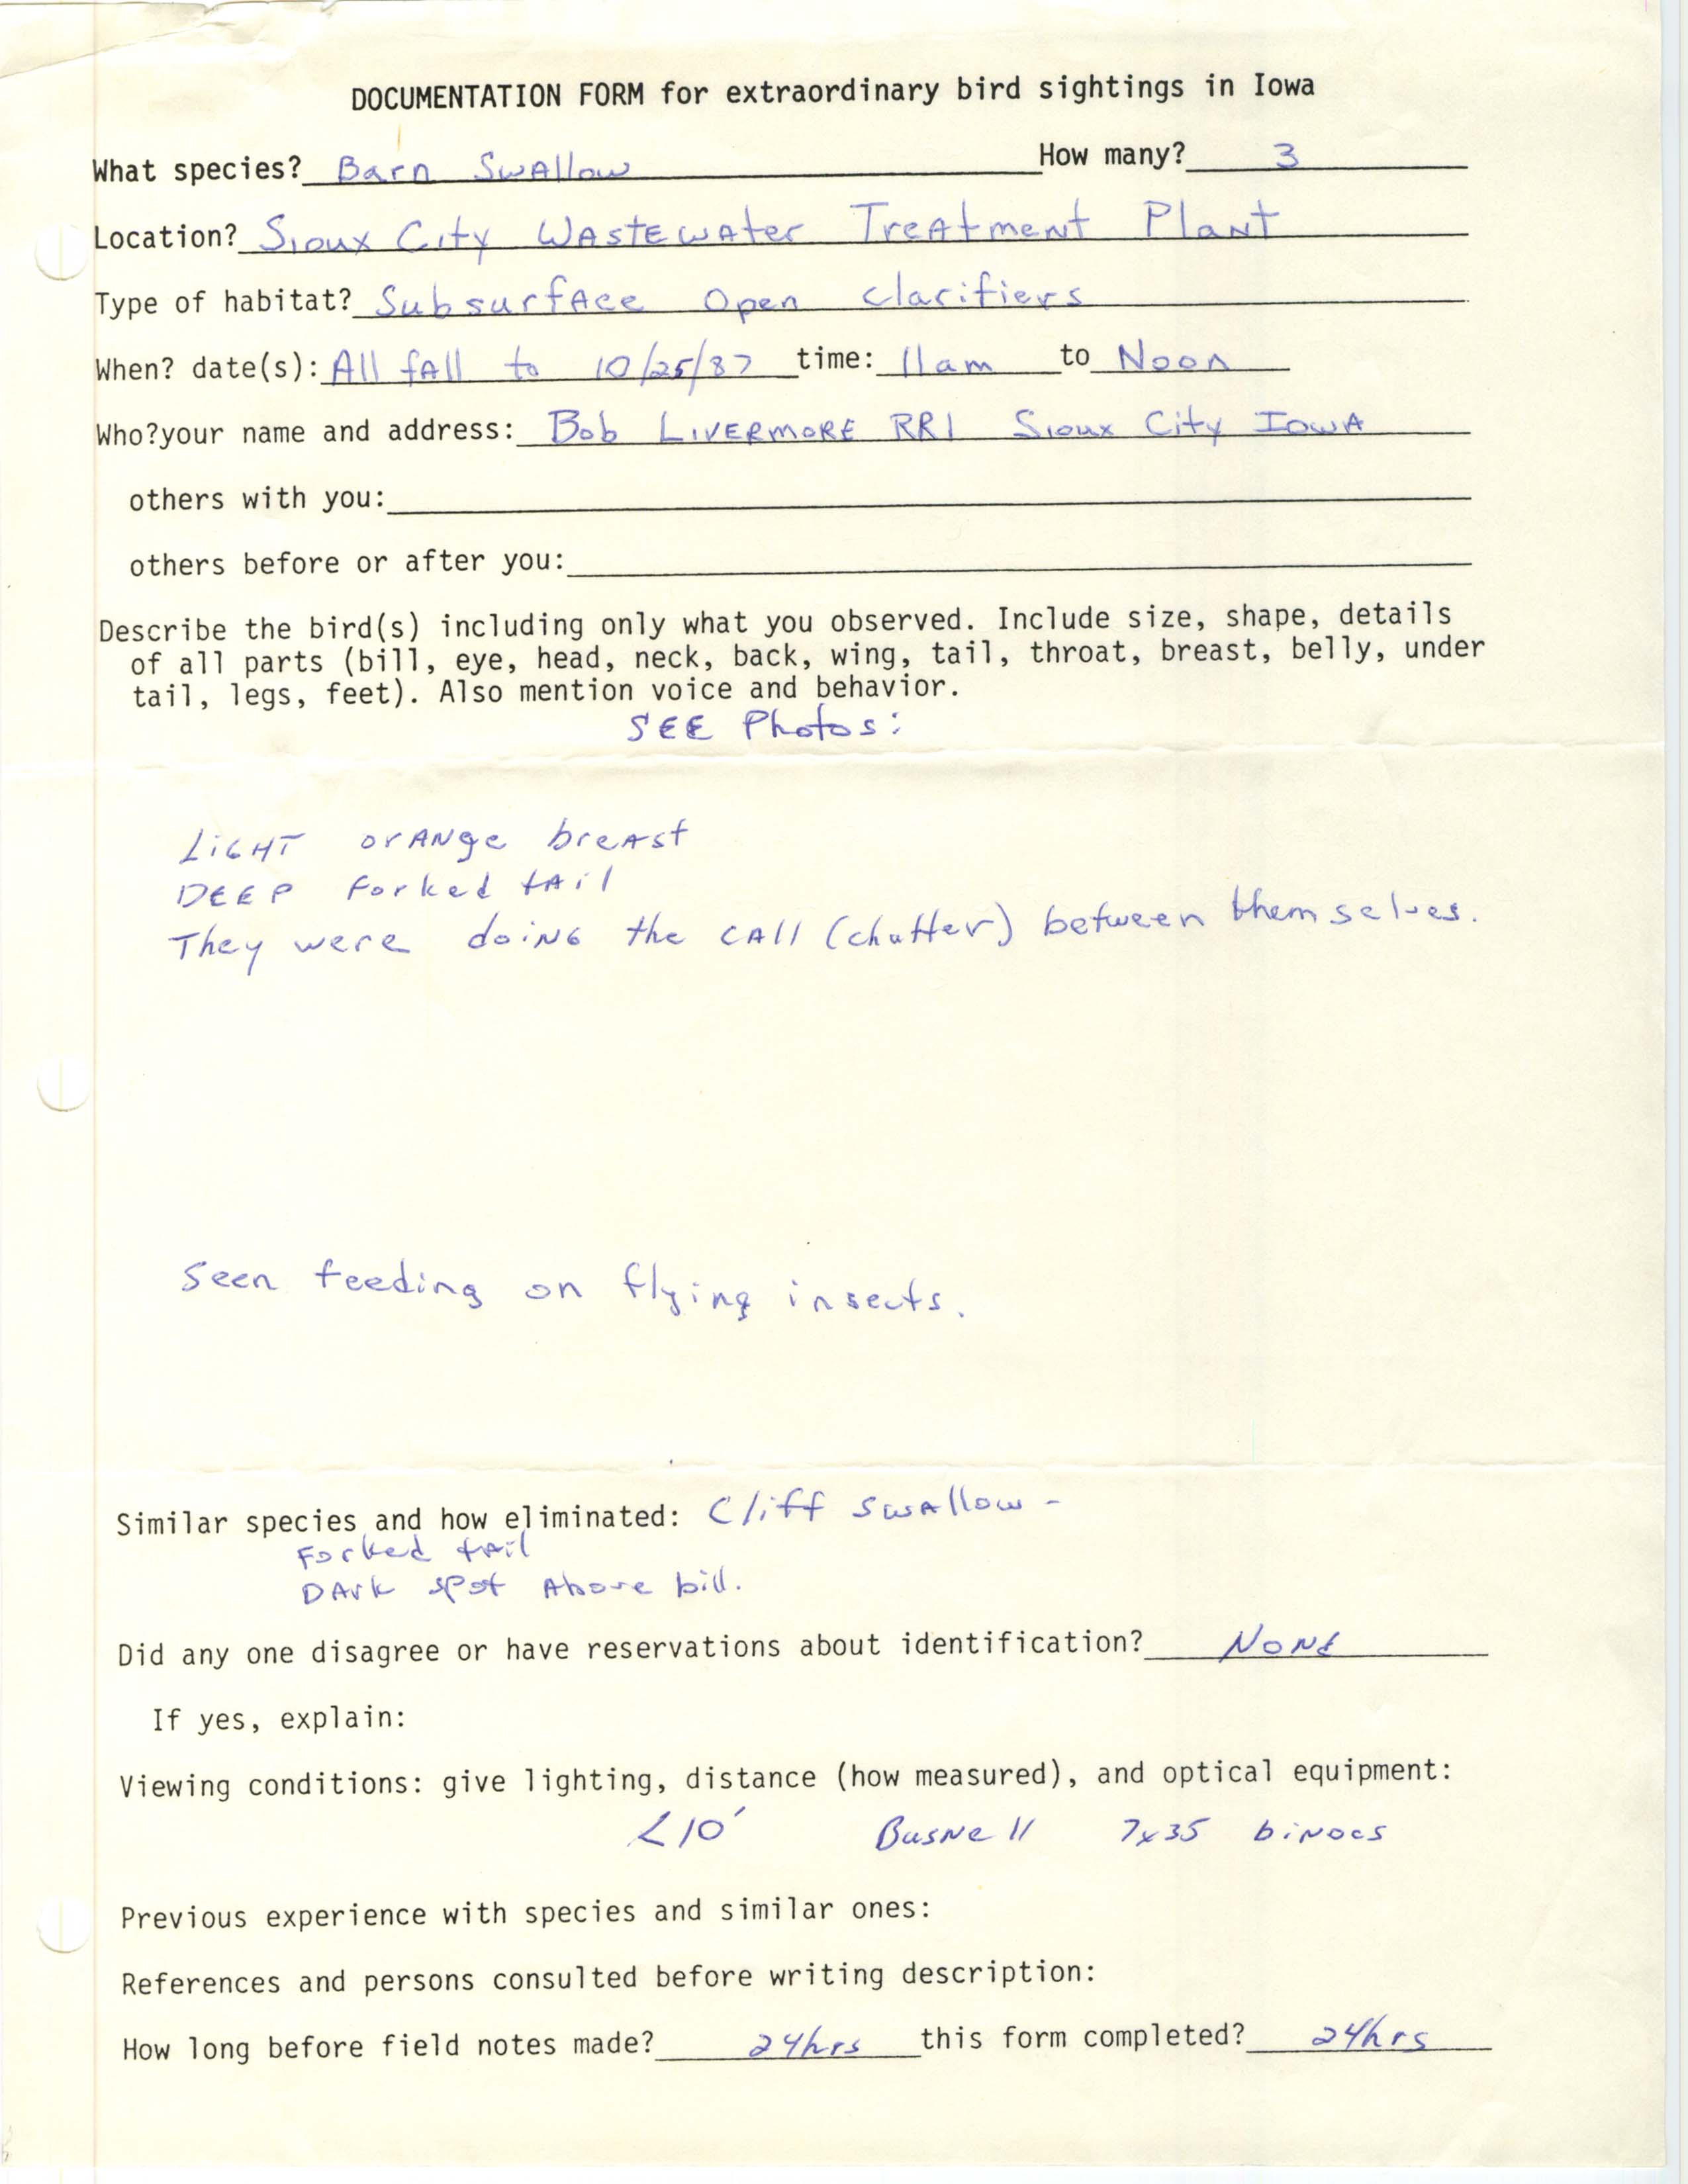 Rare bird documentation form for Barn Swallow at Sioux City Wastewater Treatment Plant in 1987